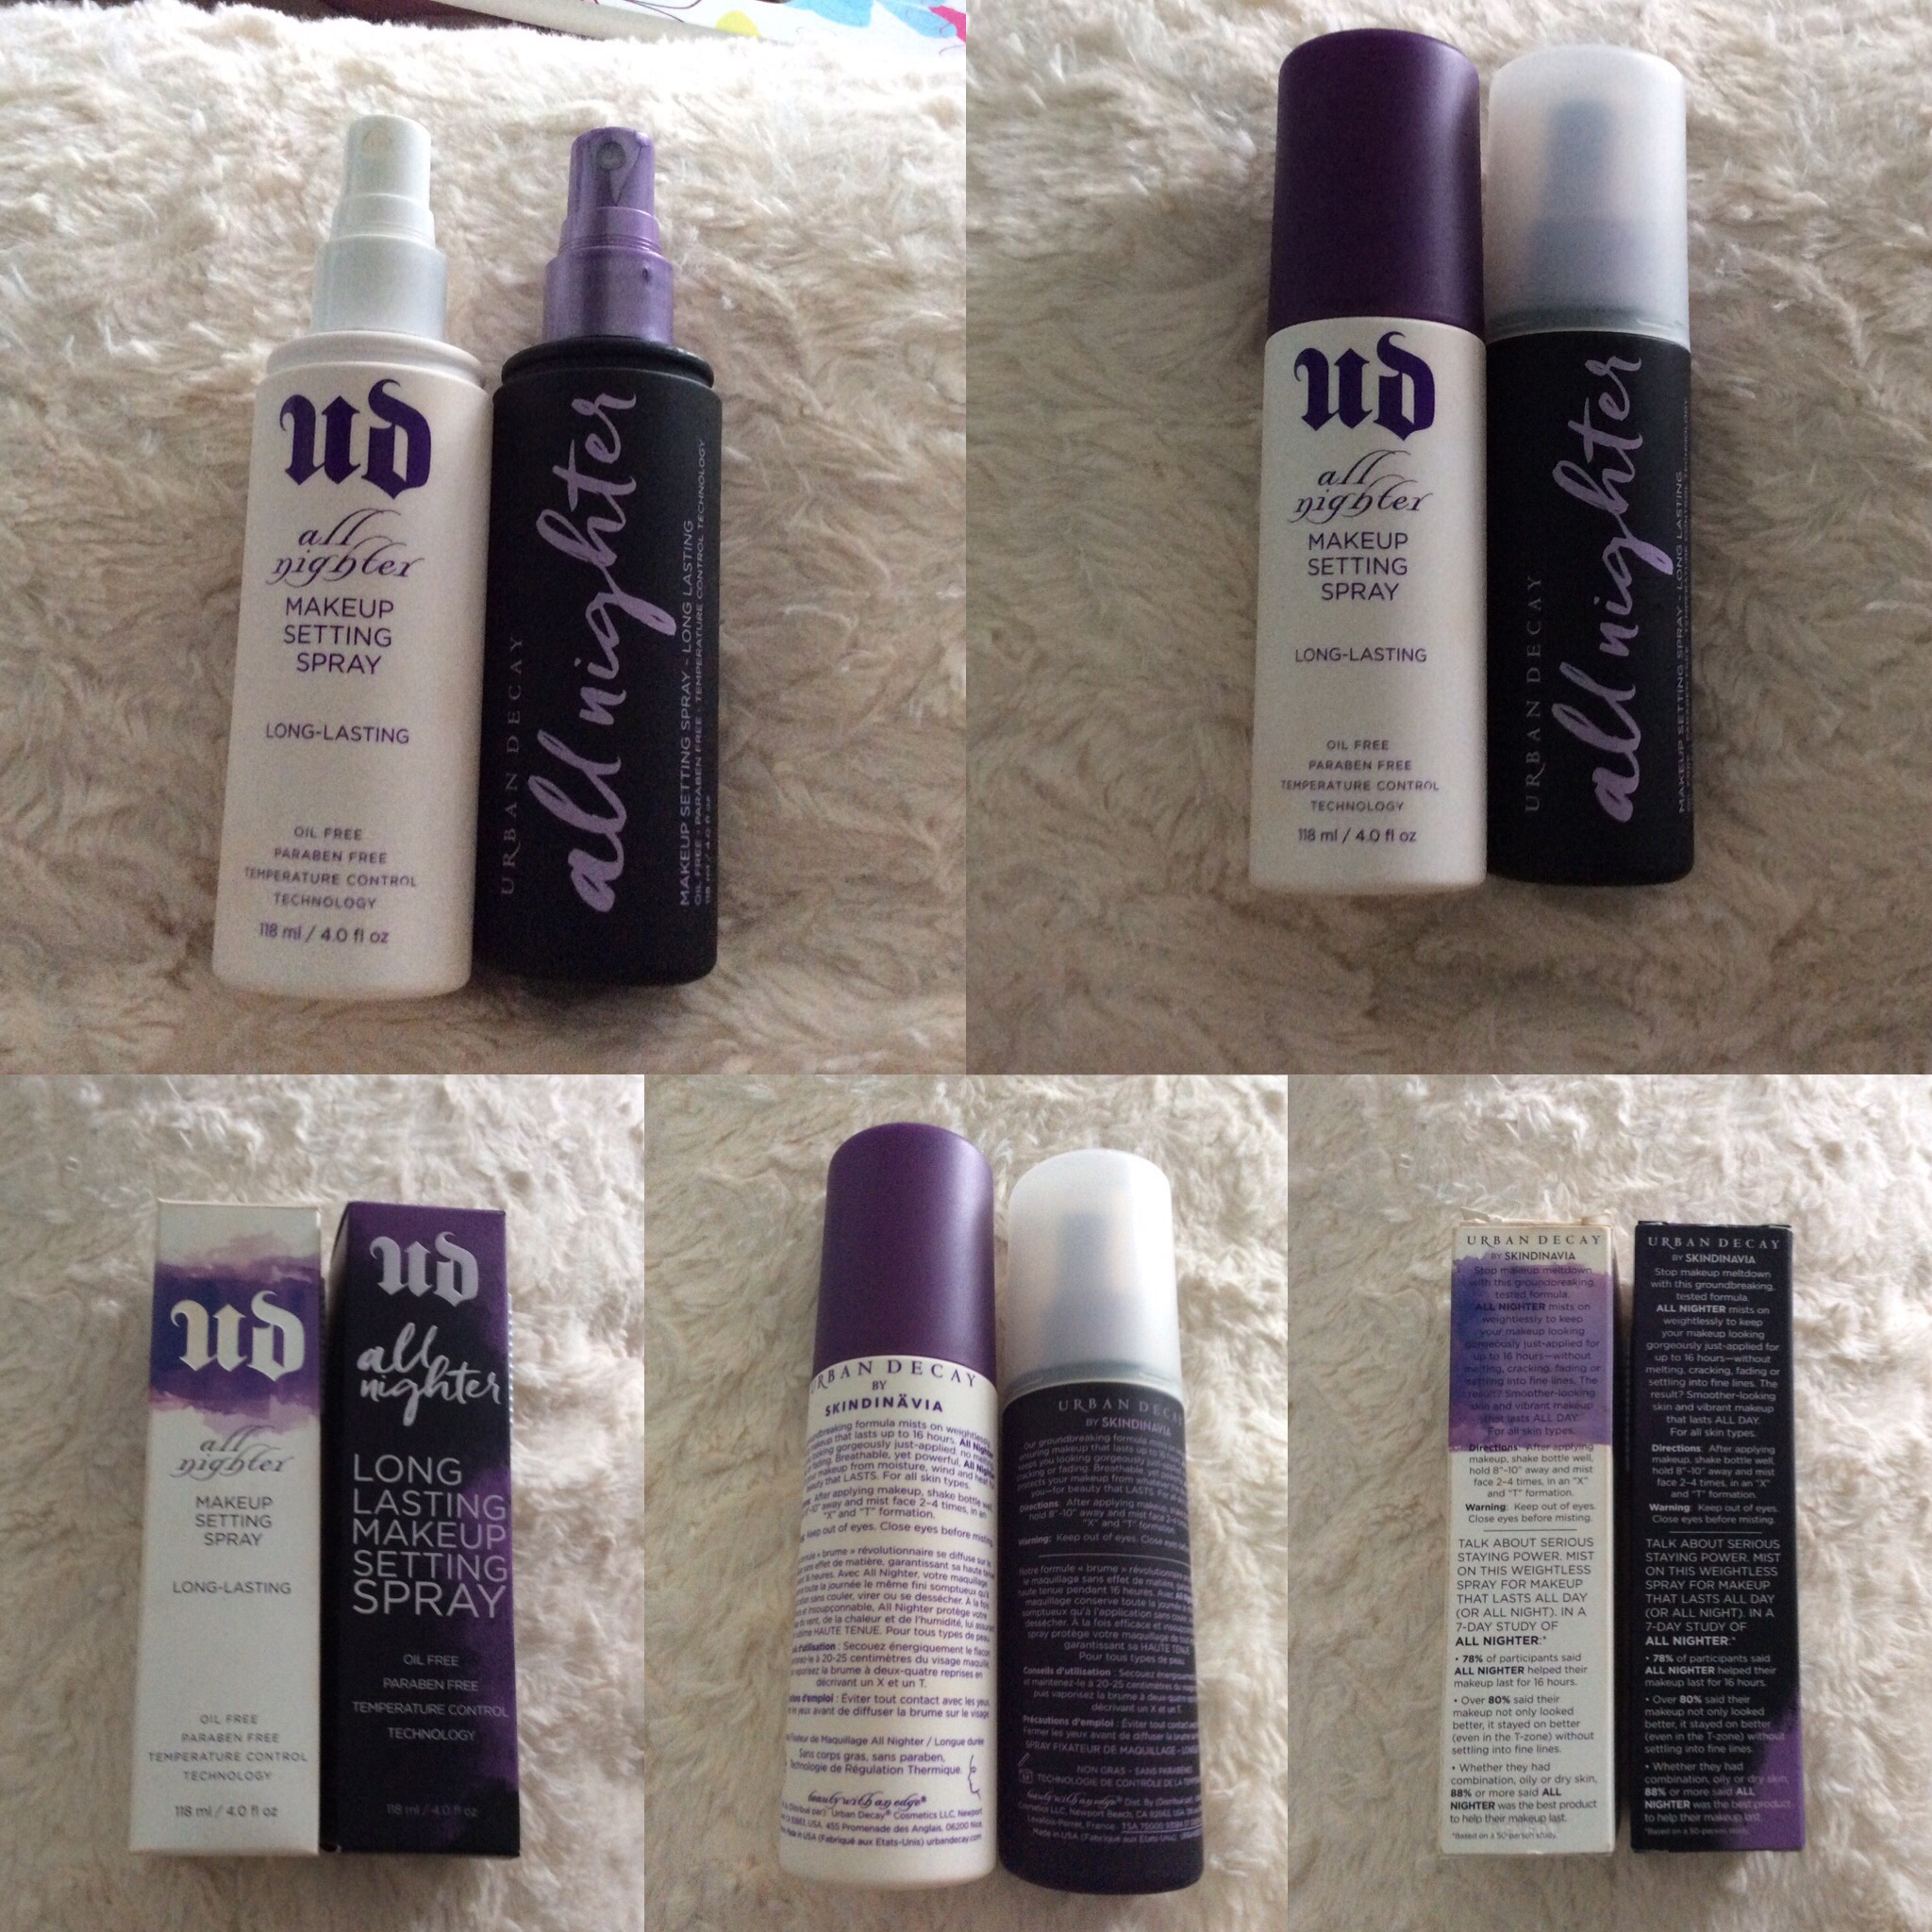 urban decay all nighter setting spray review